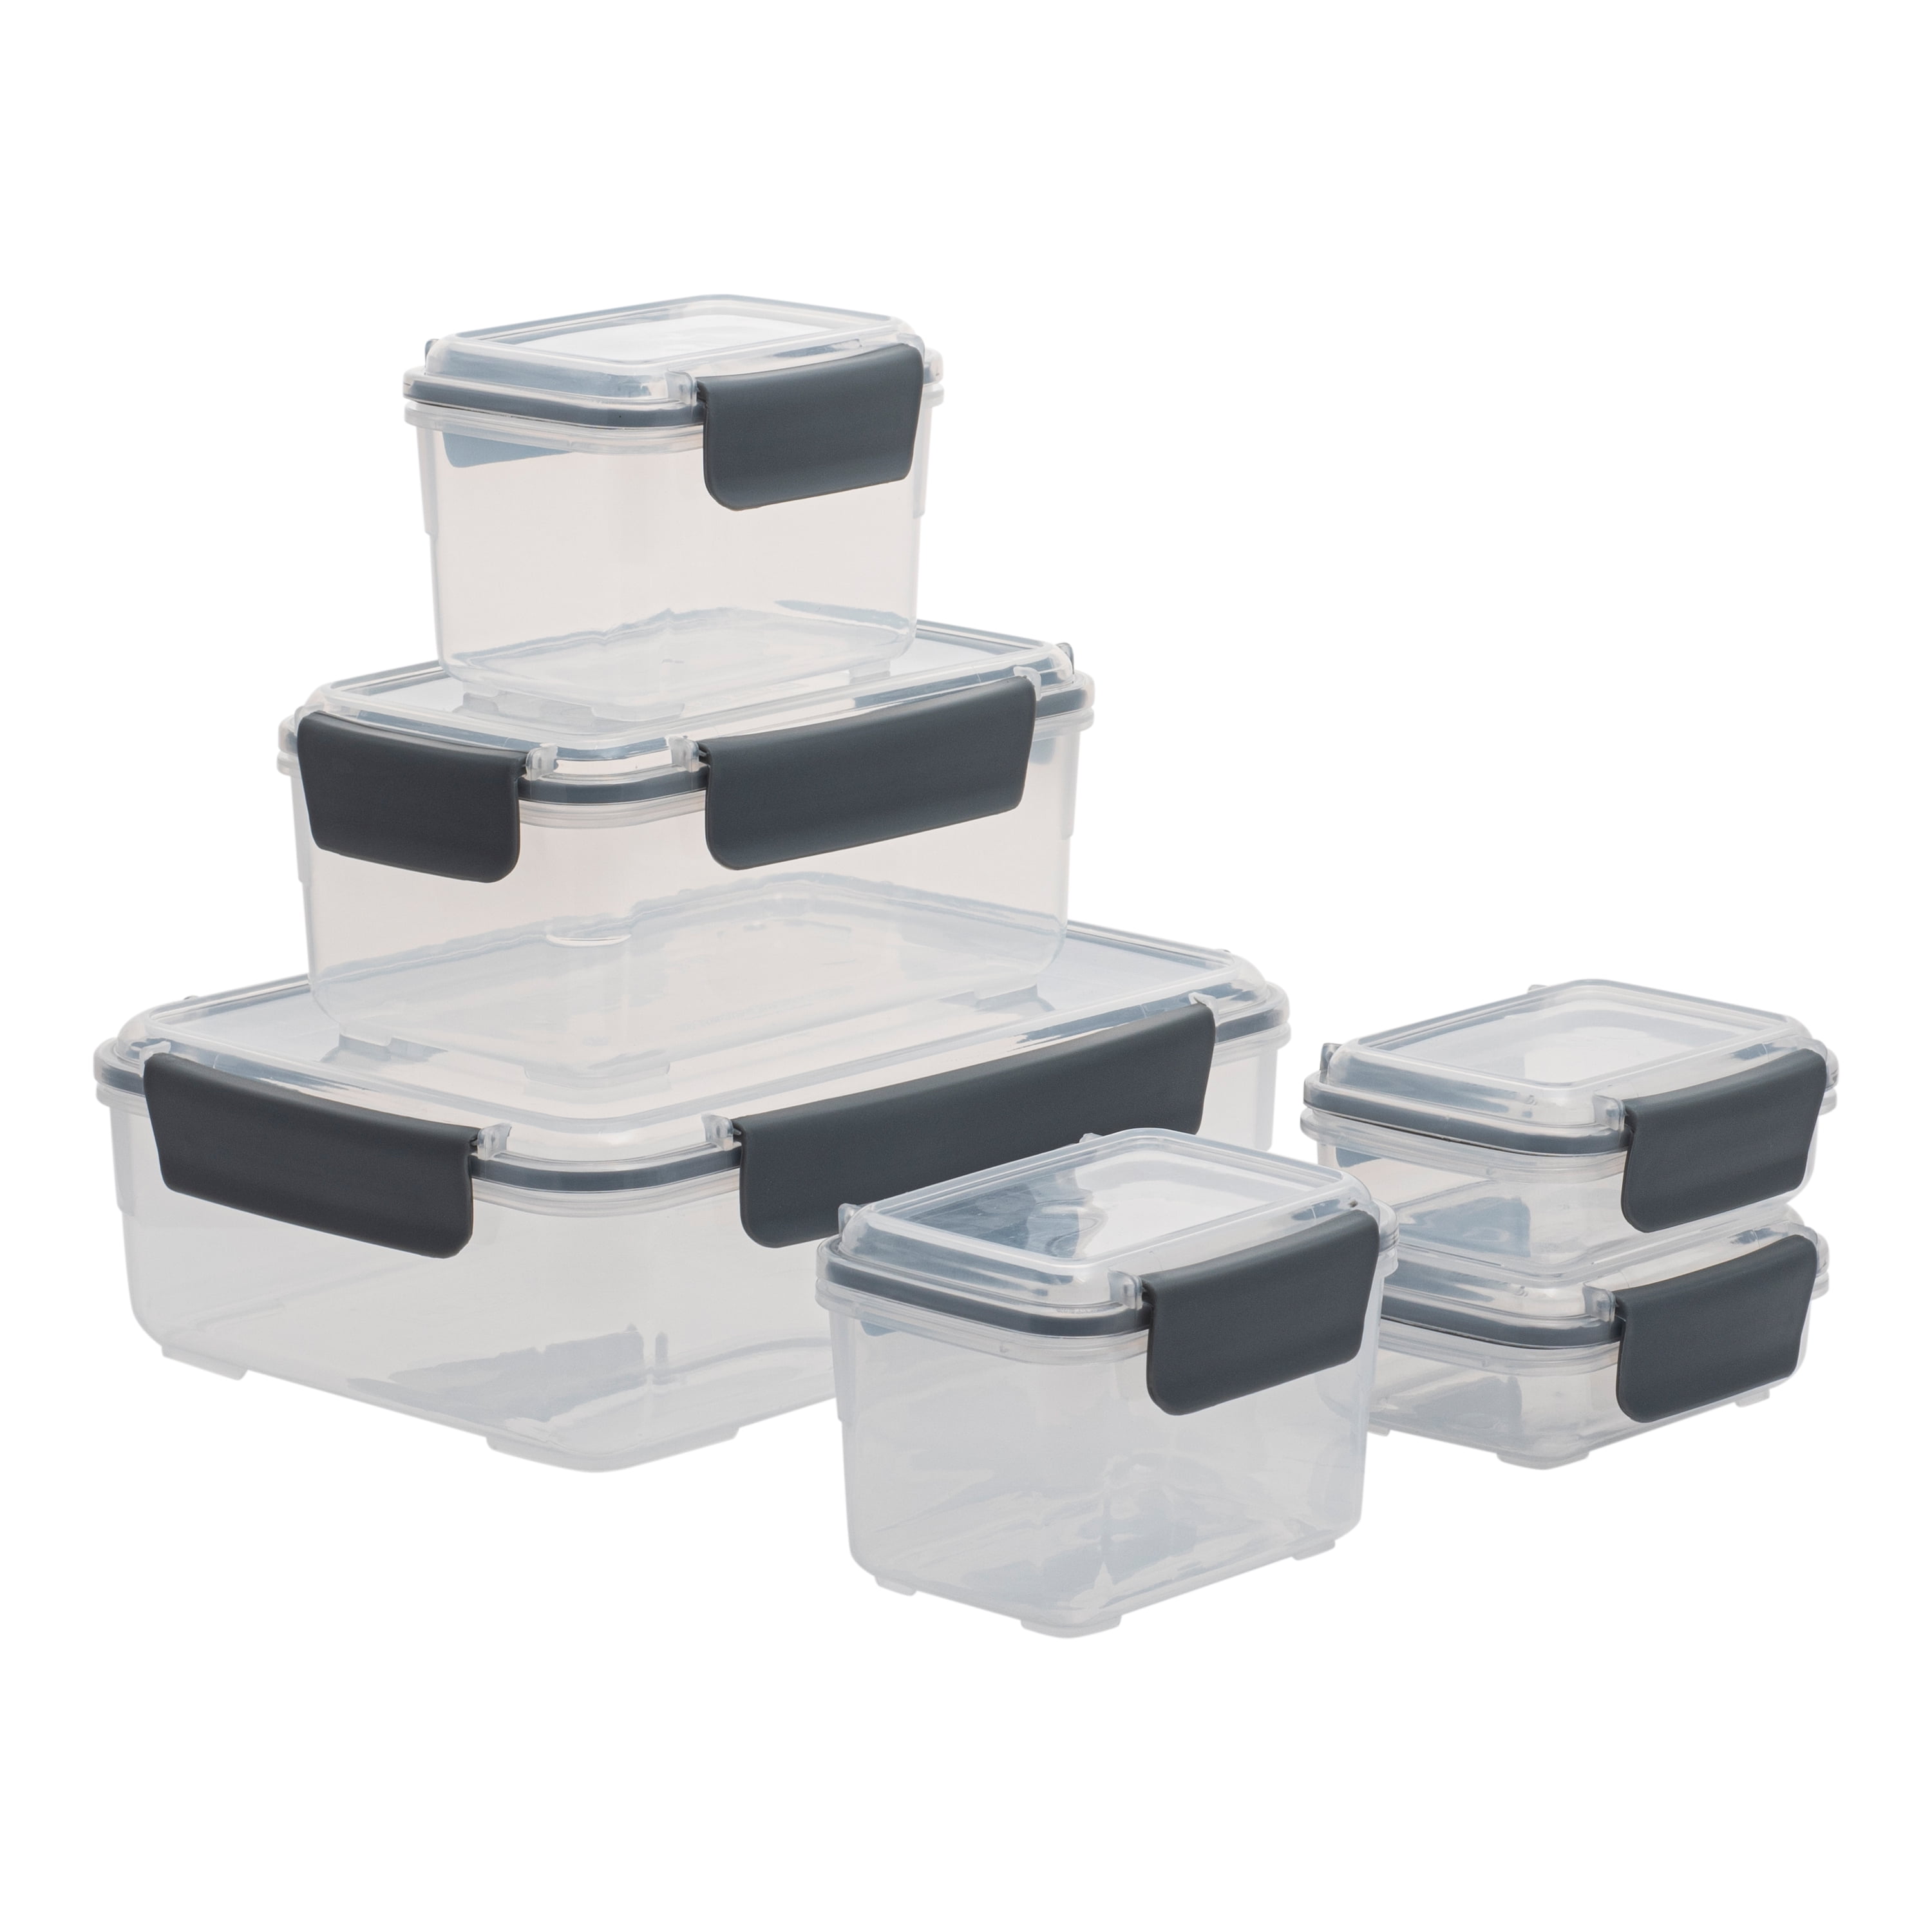 FineDine 12-Piece Airtight Food-Storage Containers with Lids - BPA-Free Plastic Kitchen Pantry Storage Containers - Dry-Food-Storage Containers Set Fo